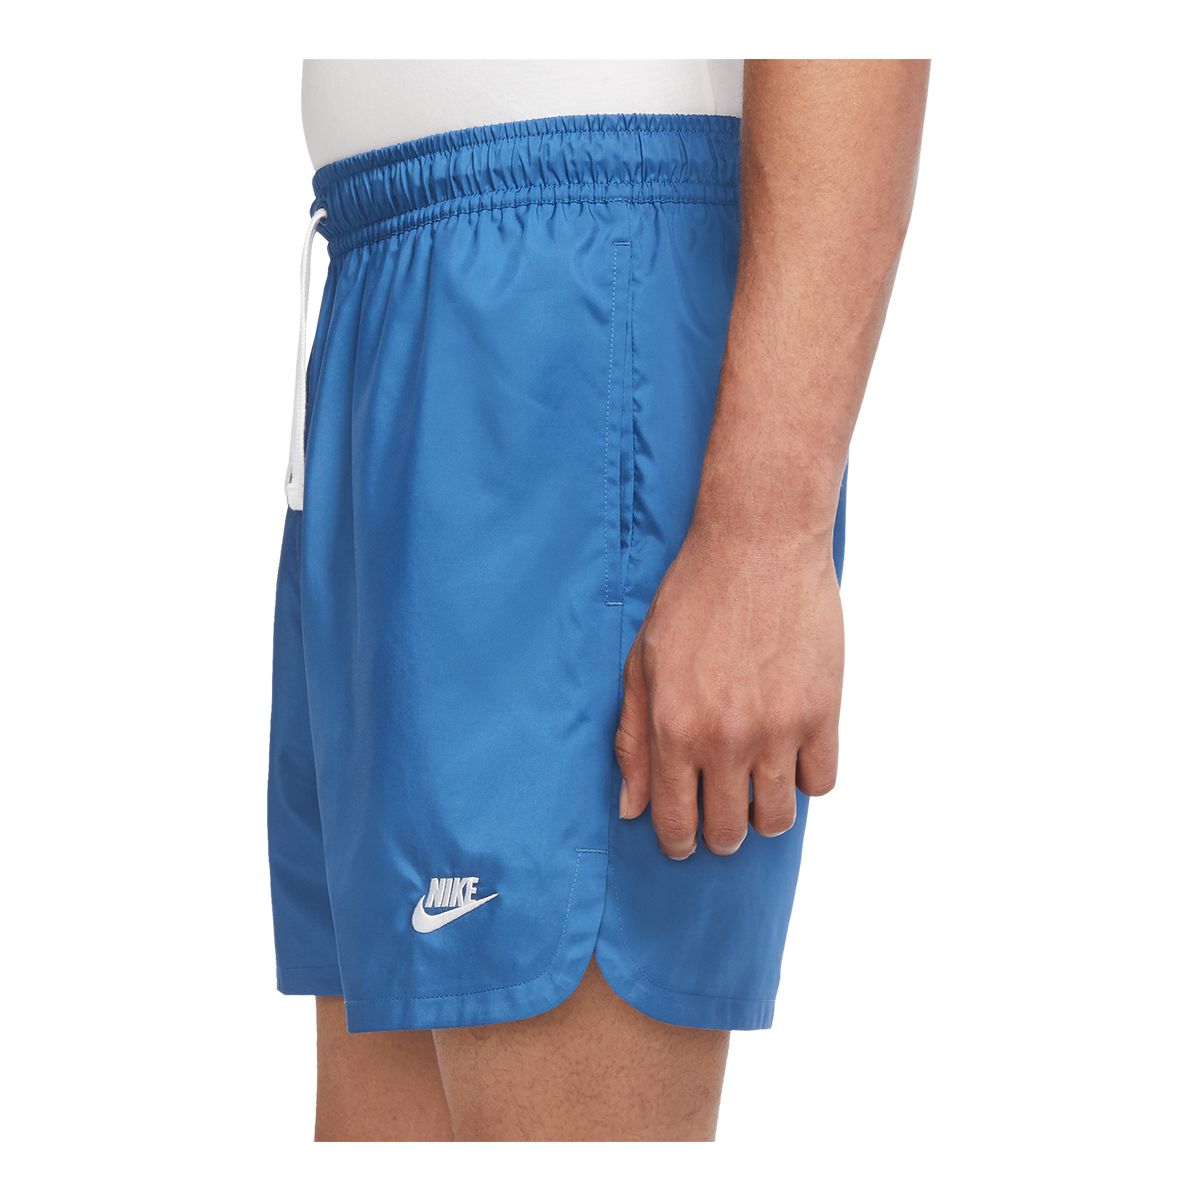 https://media-www.sportchek.ca/product/div-03-softgoods/dpt-70-athletic-clothing/sdpt-01-mens/333740722/nike-sportswear-men-s-woven-flow-shorts-38ce25e6-ee1c-4326-83ec-637045c6082d-jpgrendition.jpg?imdensity=1&imwidth=1244&impolicy=mZoom